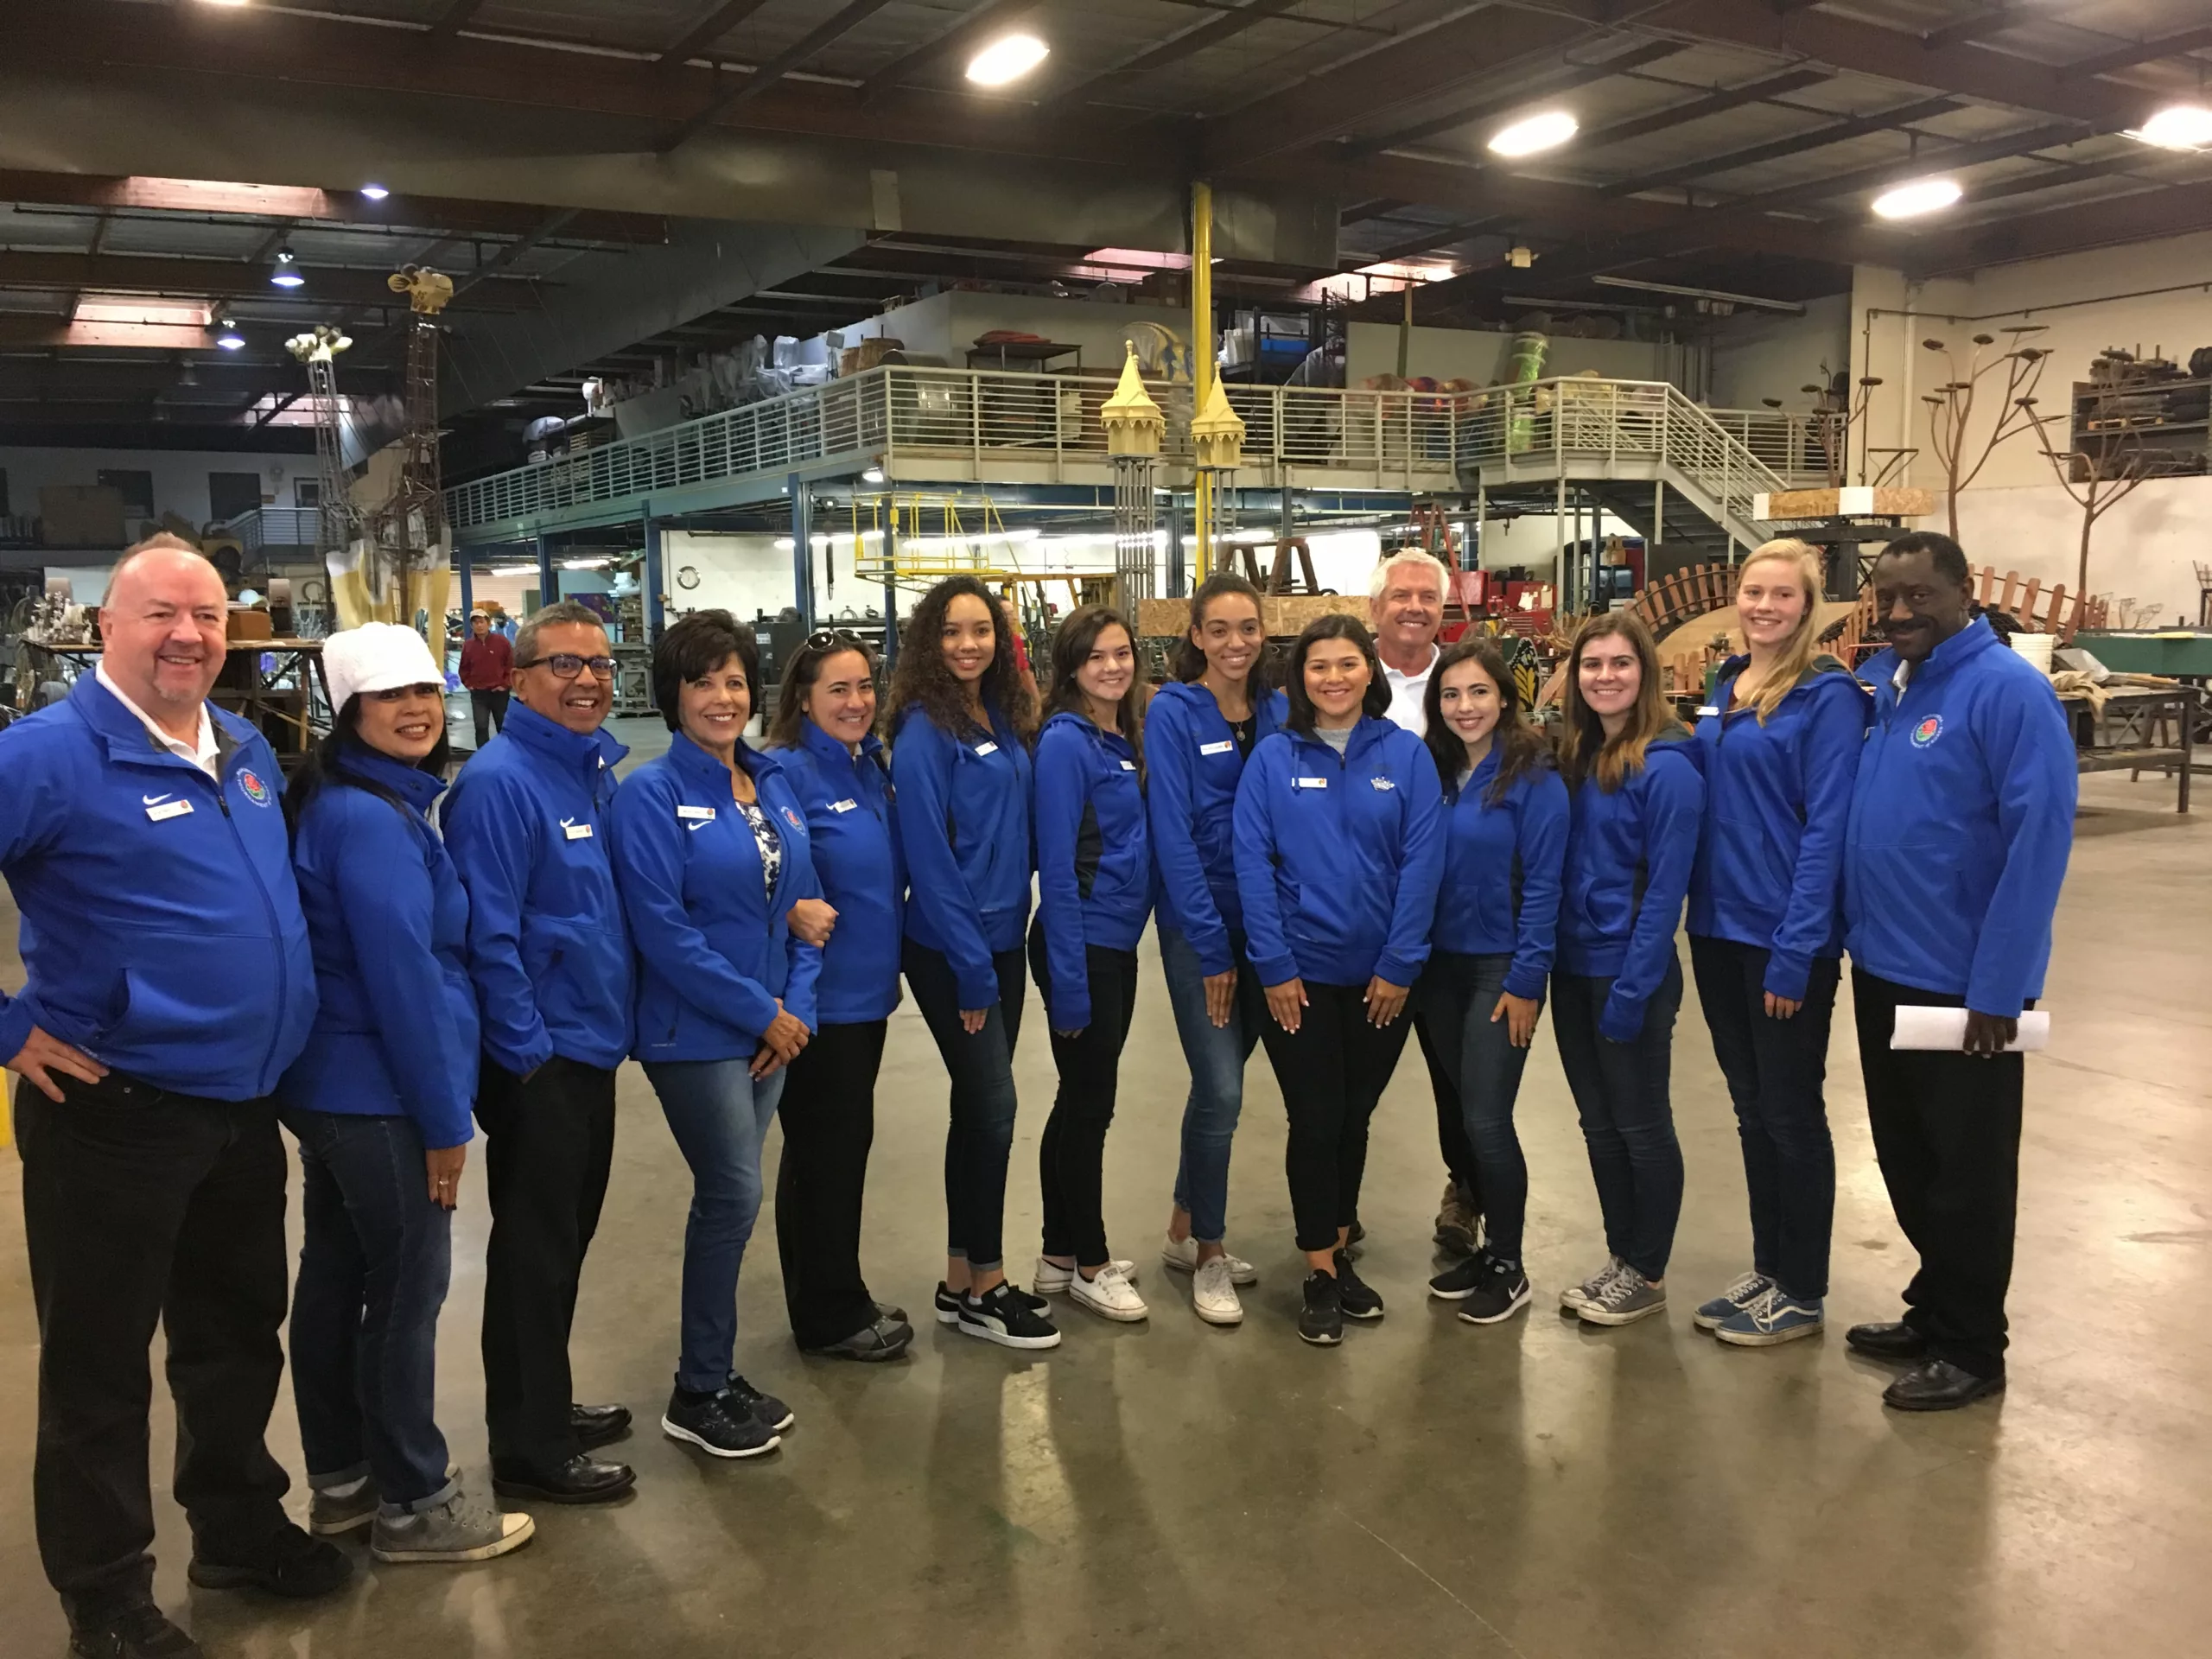 Group of employees in blue jackets smiling in a workshop setting